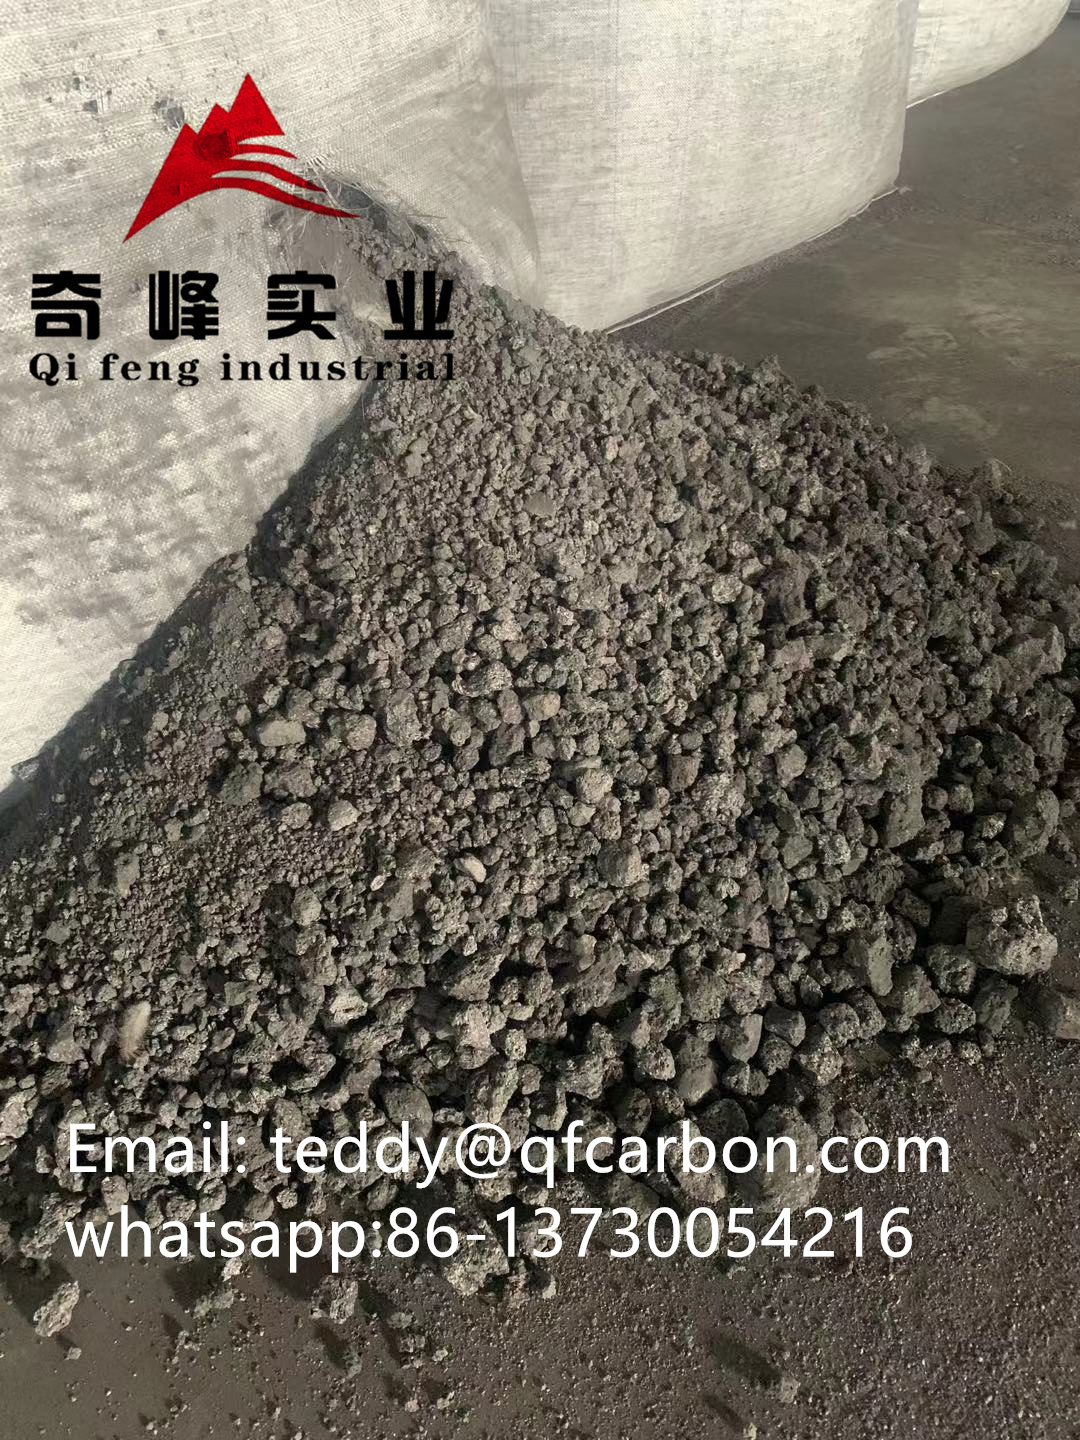 Daily Calcined Petroleum Coke Market on August 9th